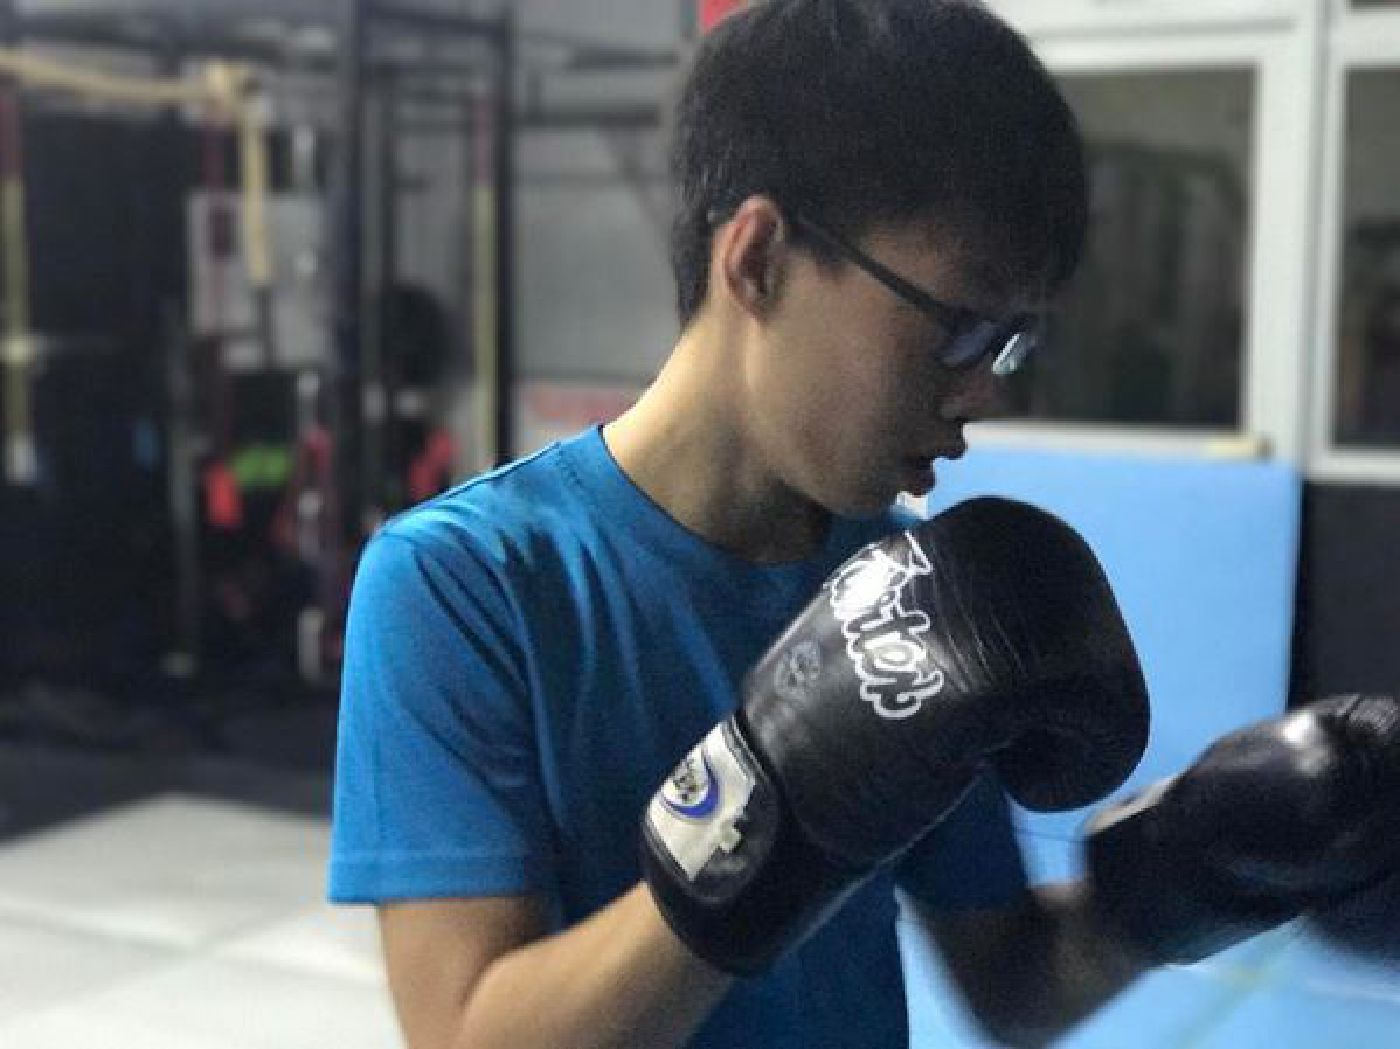 A Muay Thai Singapore West student getting focused and ready for Muay Thai training